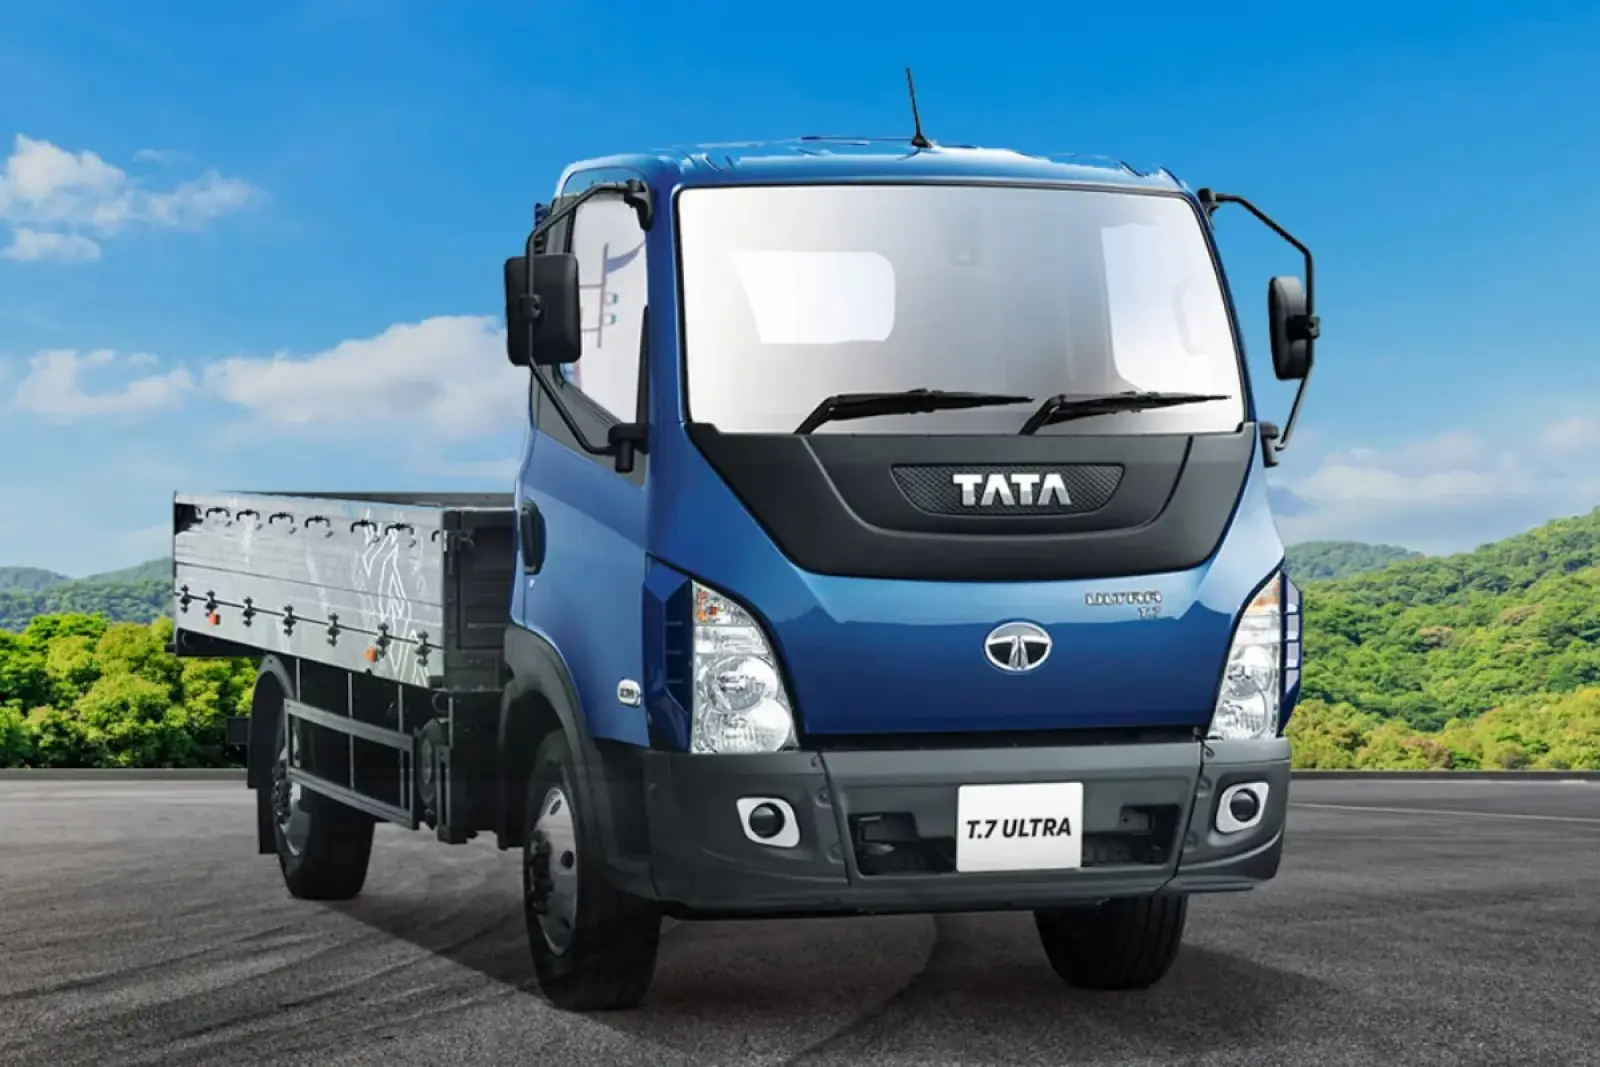 Are you planning to buy Tata's commercial vehicle, the prices are going to increase from this day